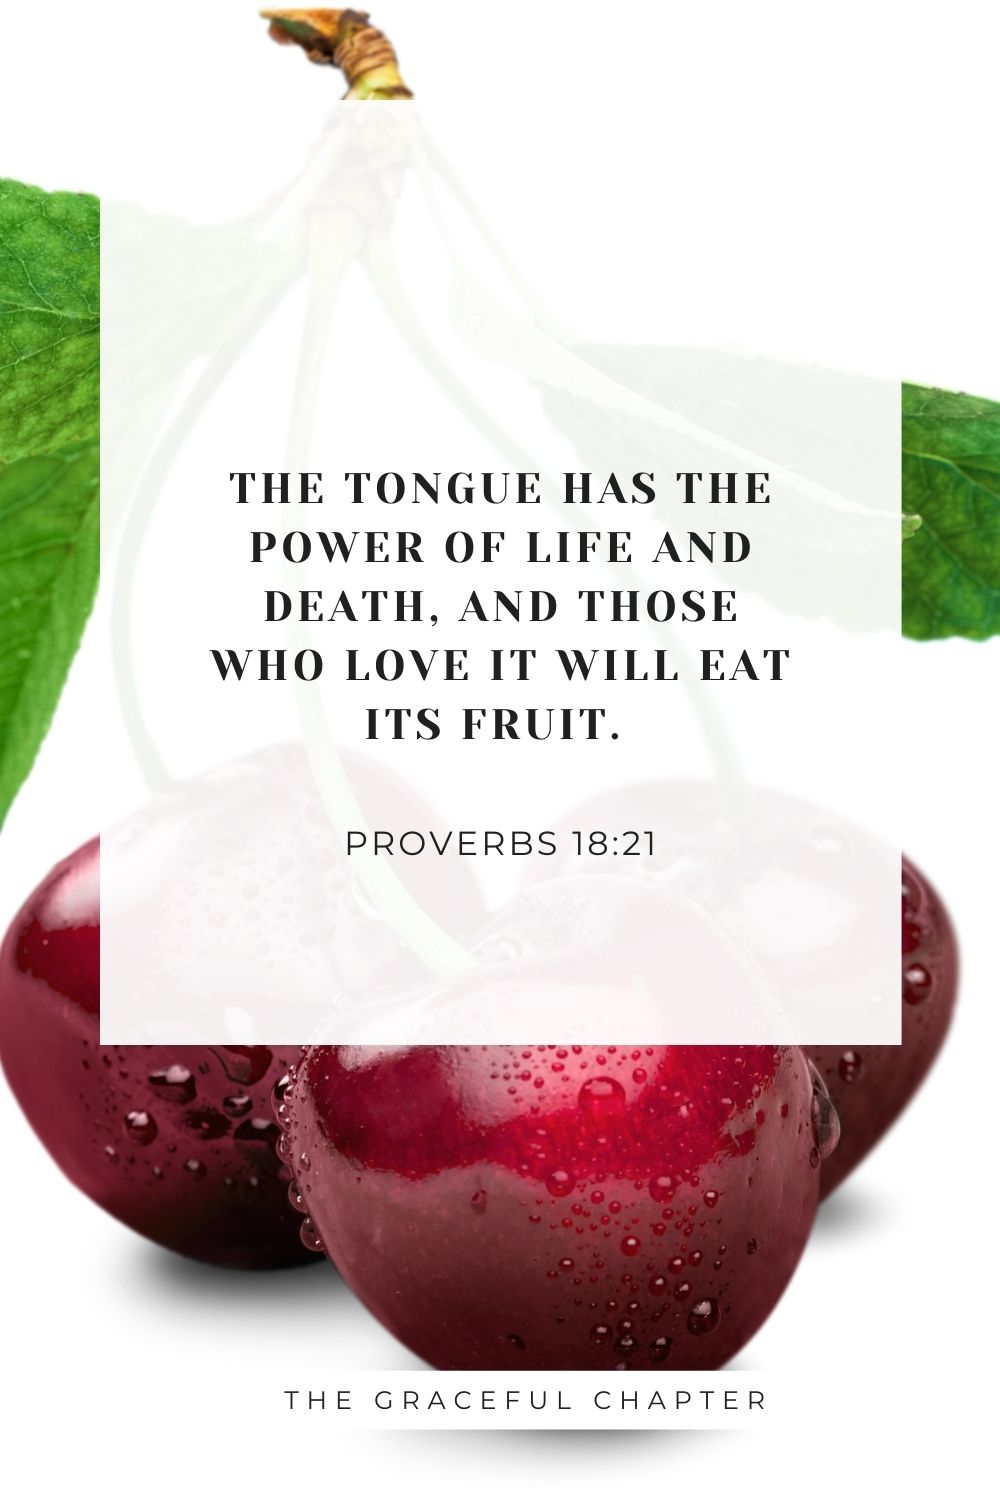 The tongue has the power of life and death, and those who love it will eat its fruit. Proverbs 18:21